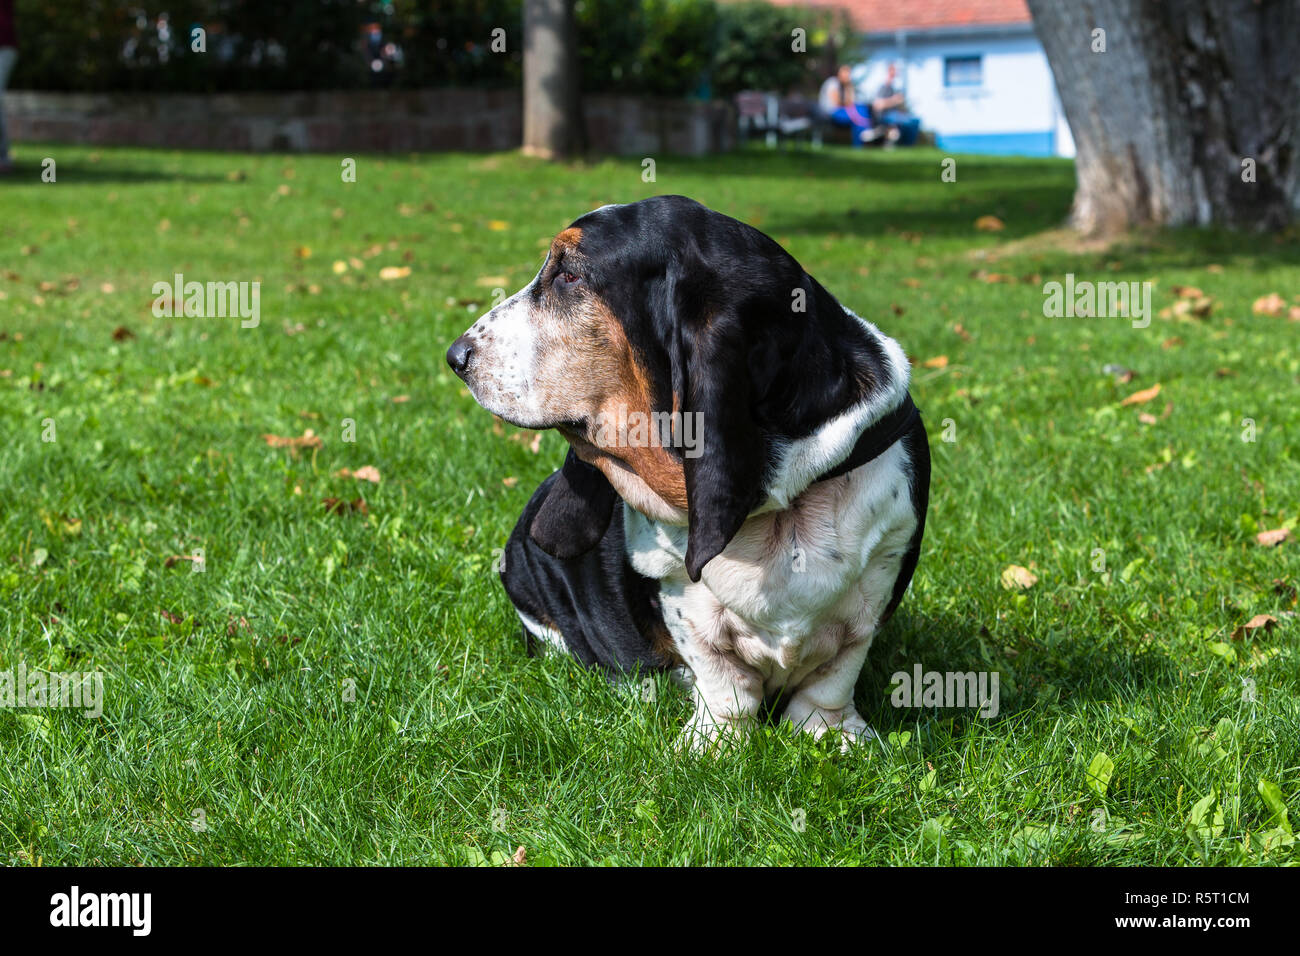 Basset stock and images - Alamy